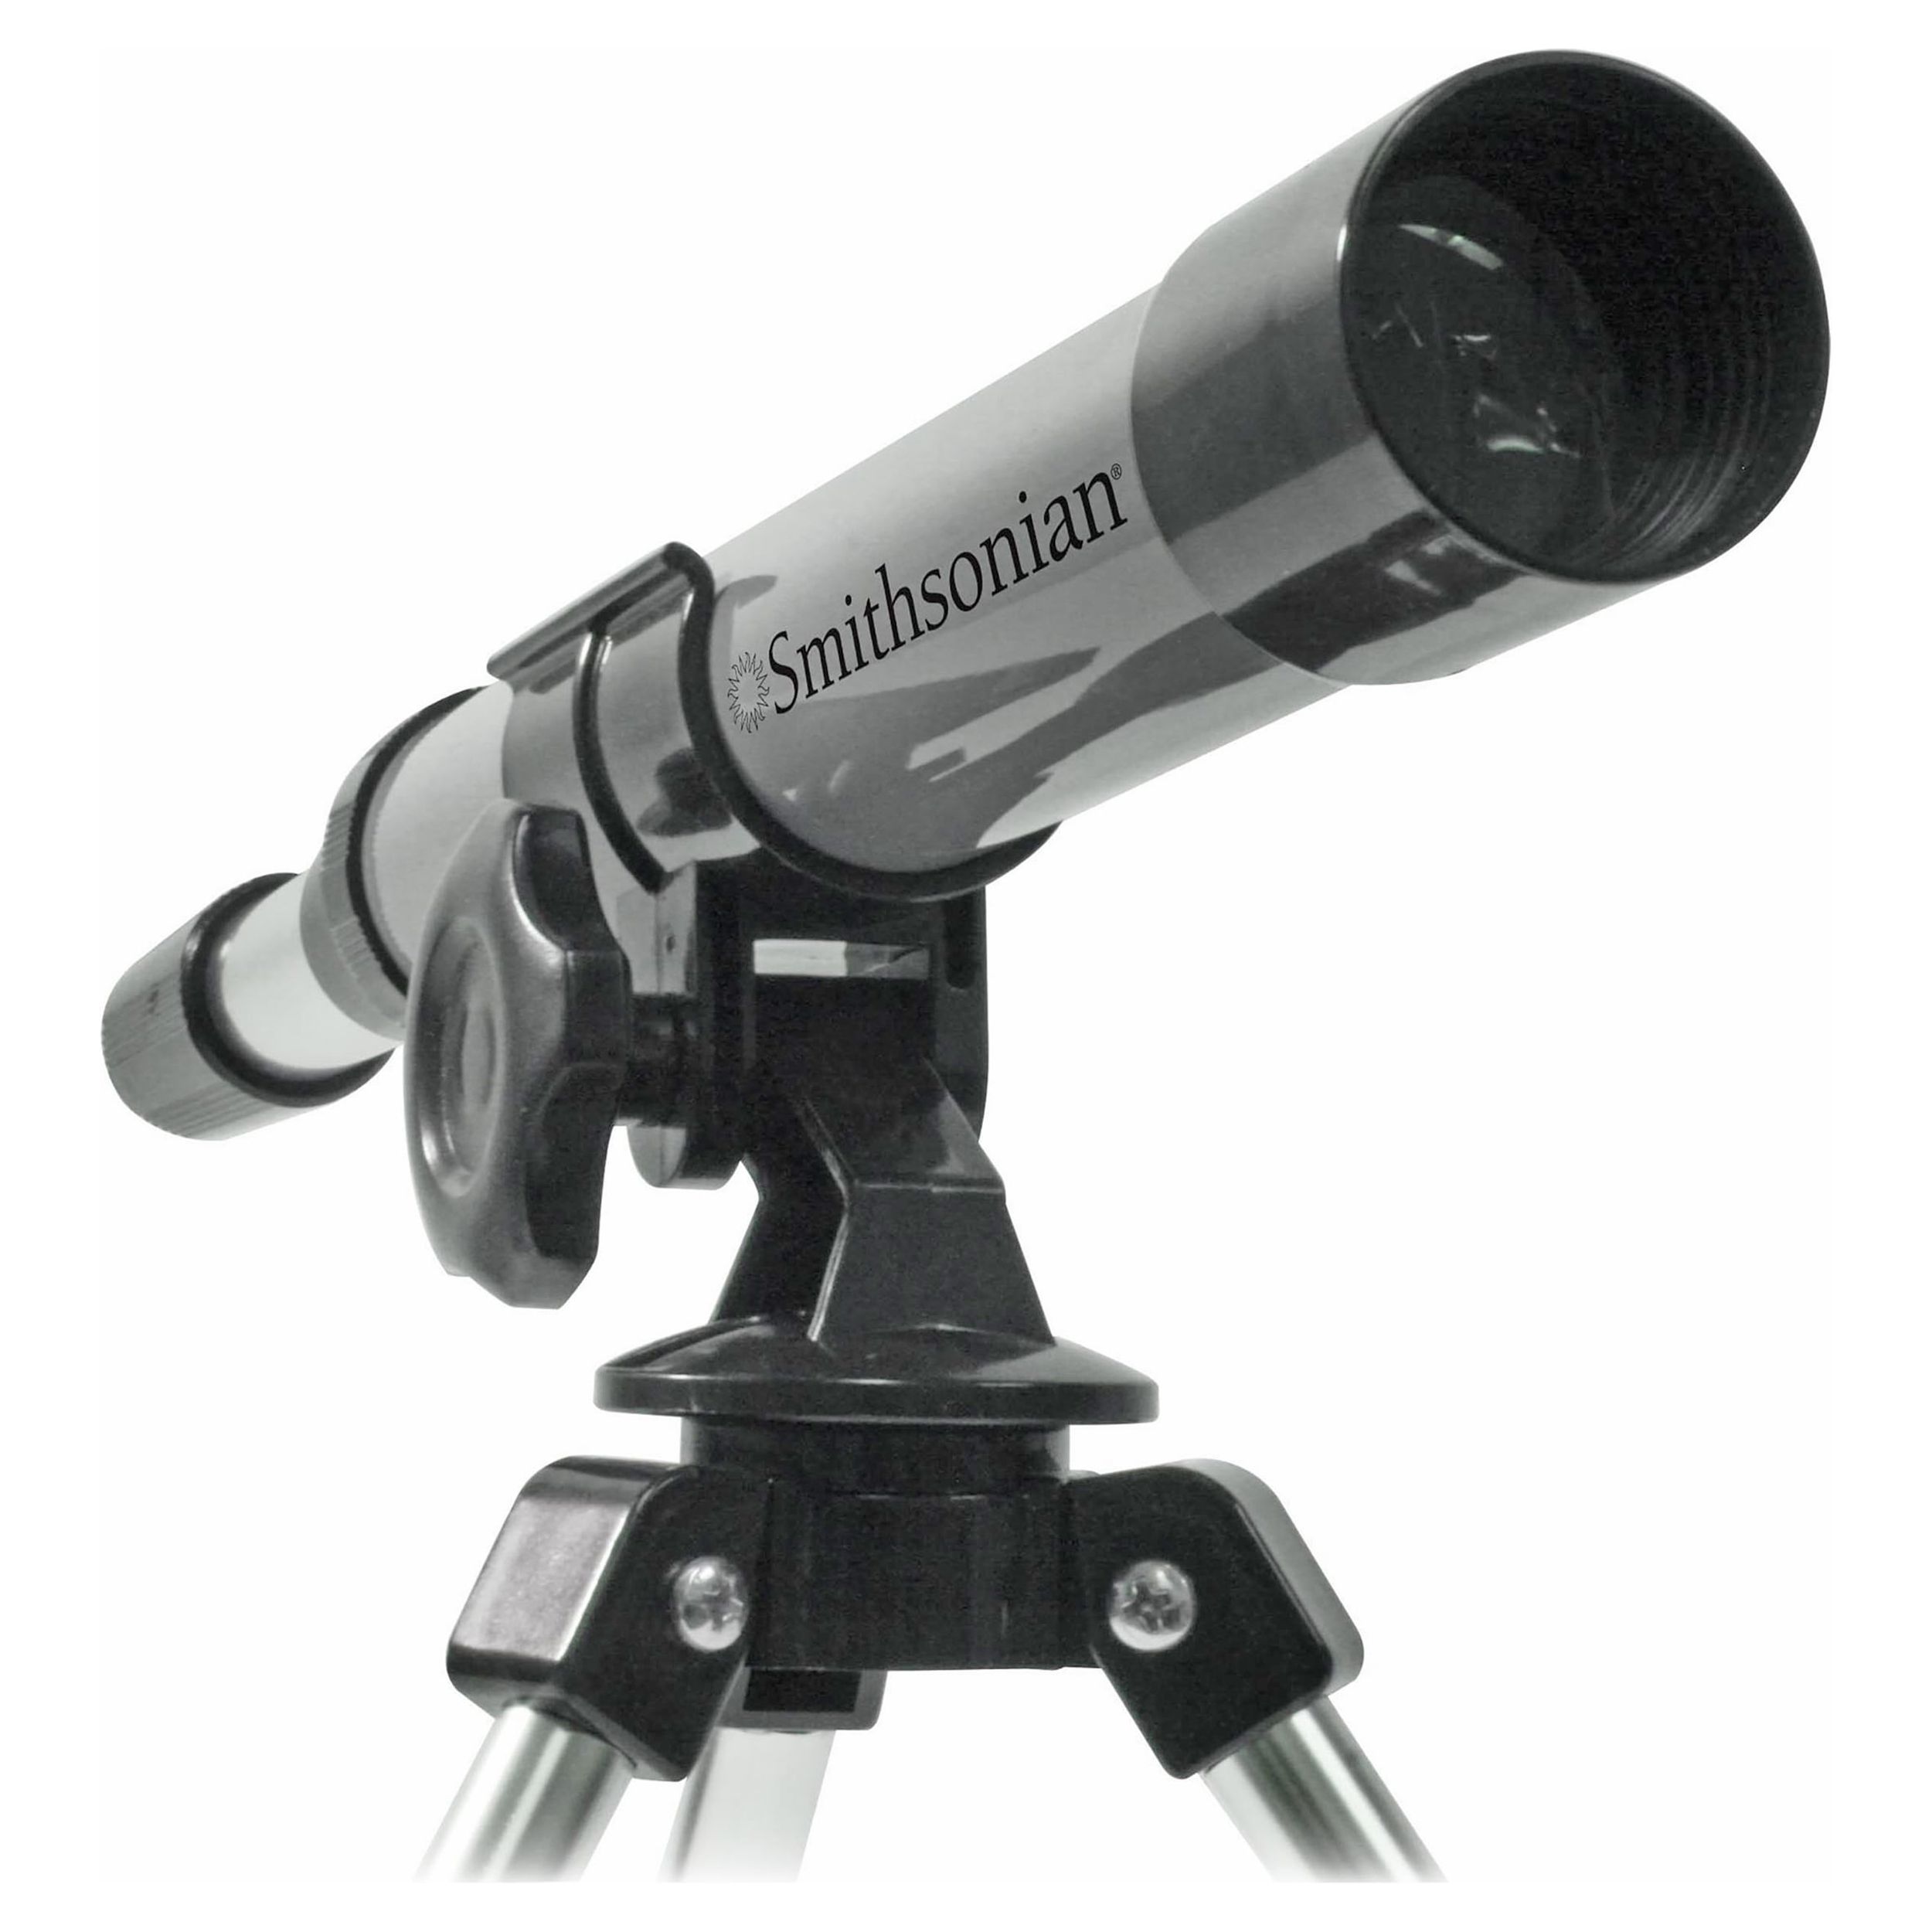 Smithsonian 30X Telescope/Monocular Kit in Black #22259- Unisex Gift for Ages 8 Years and up - image 1 of 5